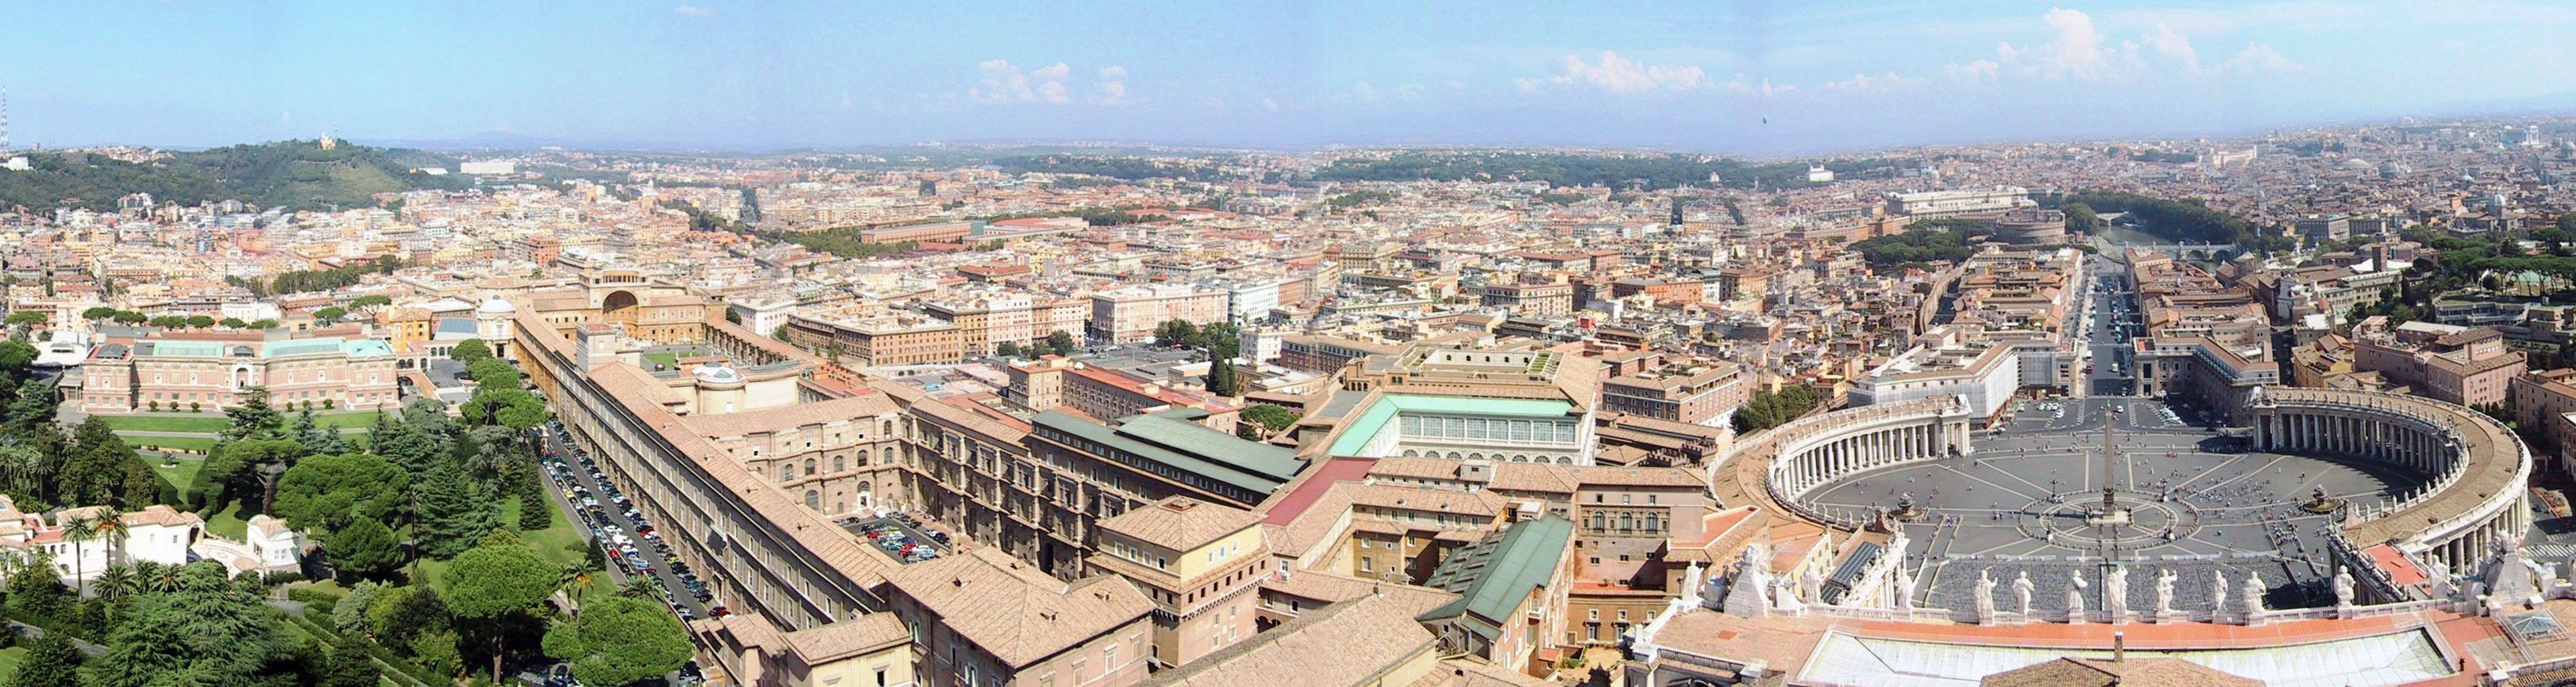 View Over Rome